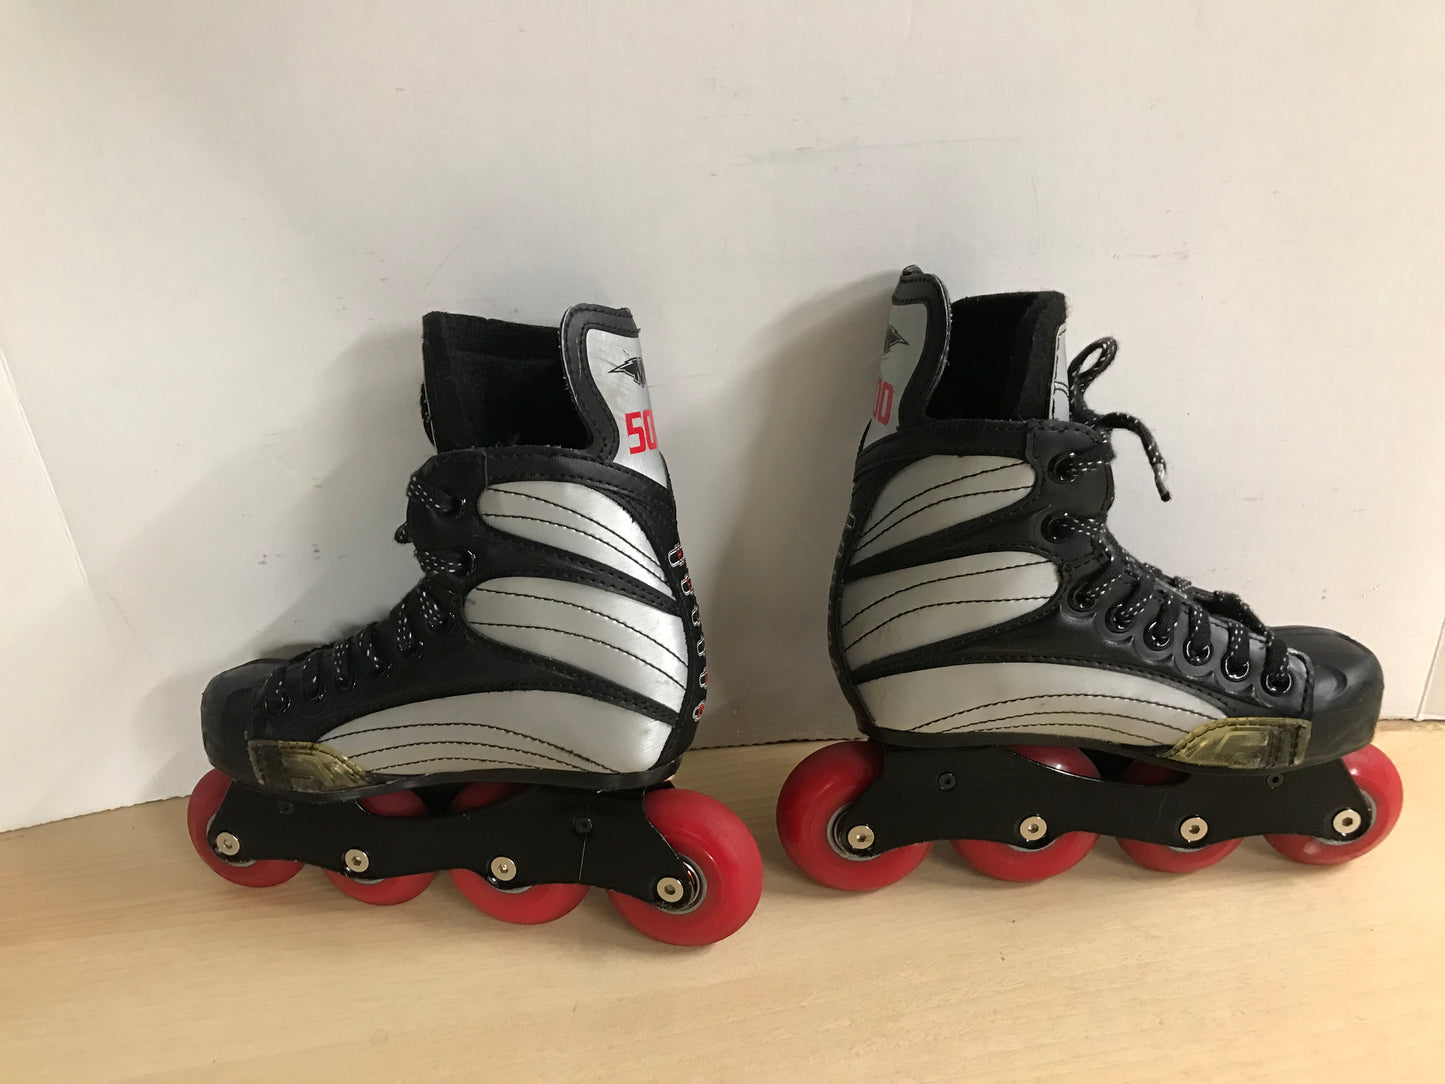 Hockey Roller Hockey Skates Child Size 12 E Shoe Size Mission Black Red Rubber Wheels Excellent